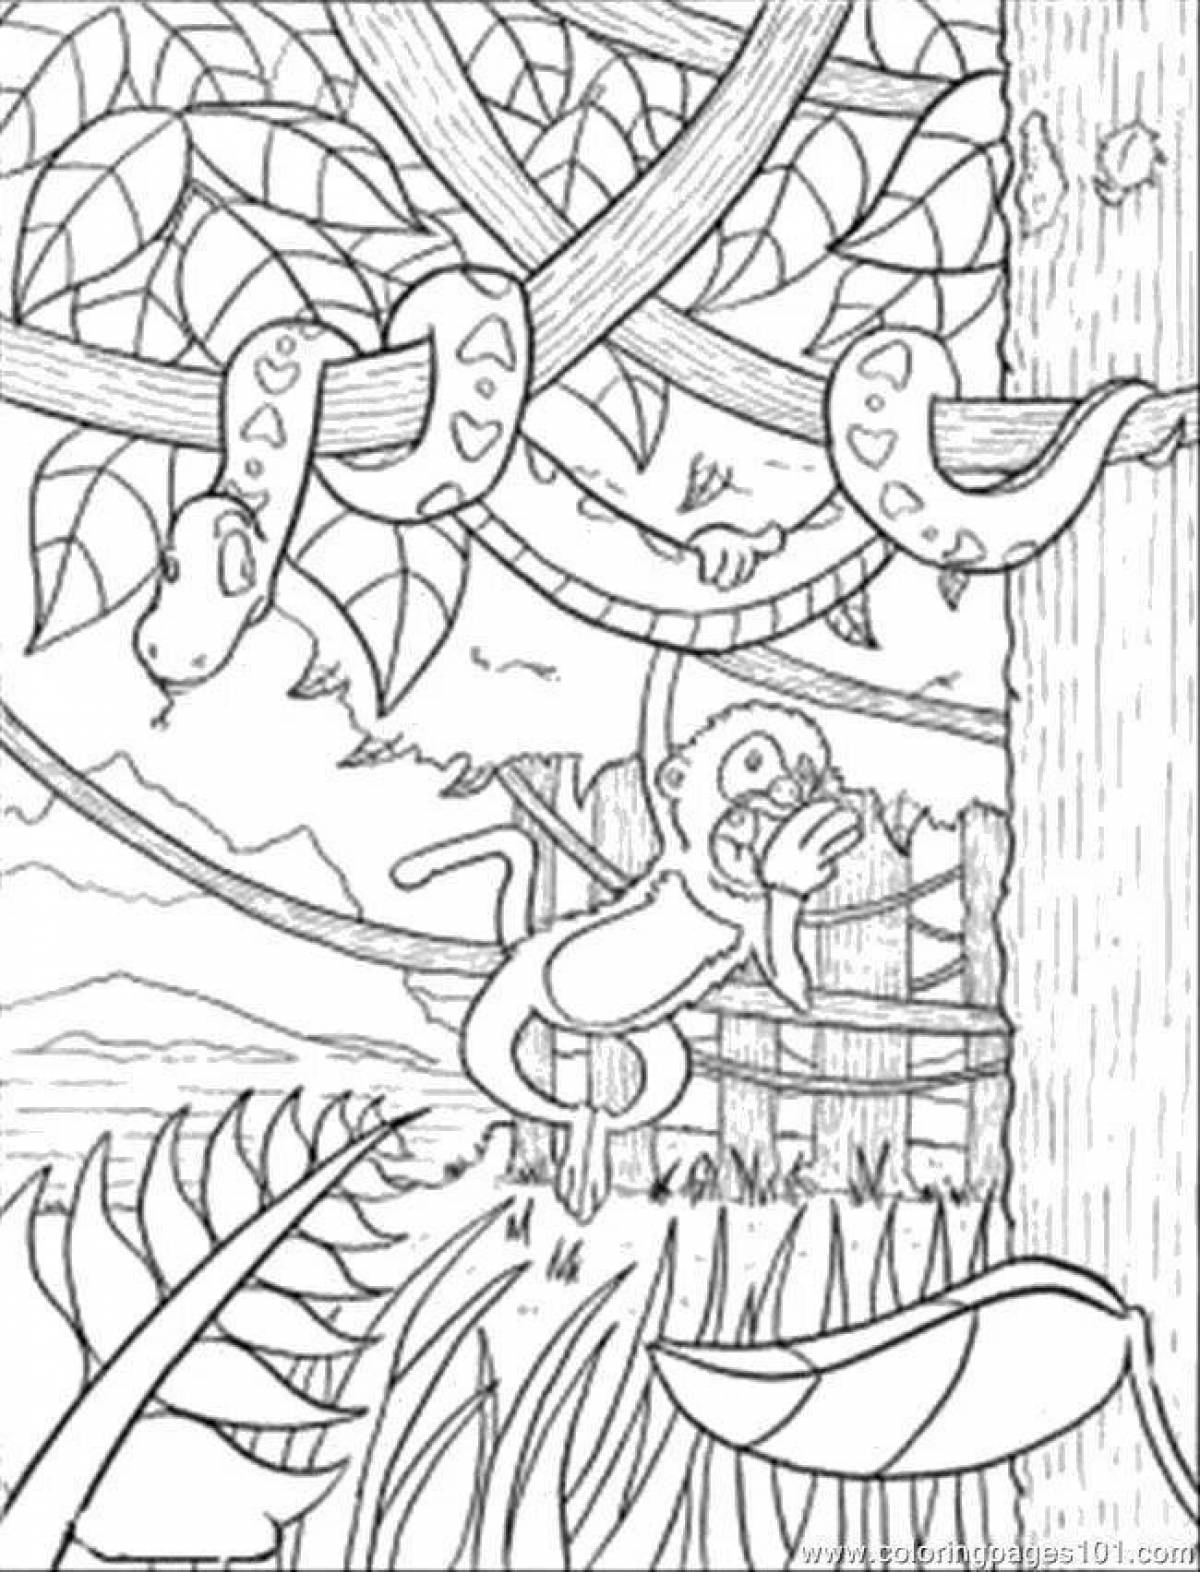 Coloring book outstanding jungle animals